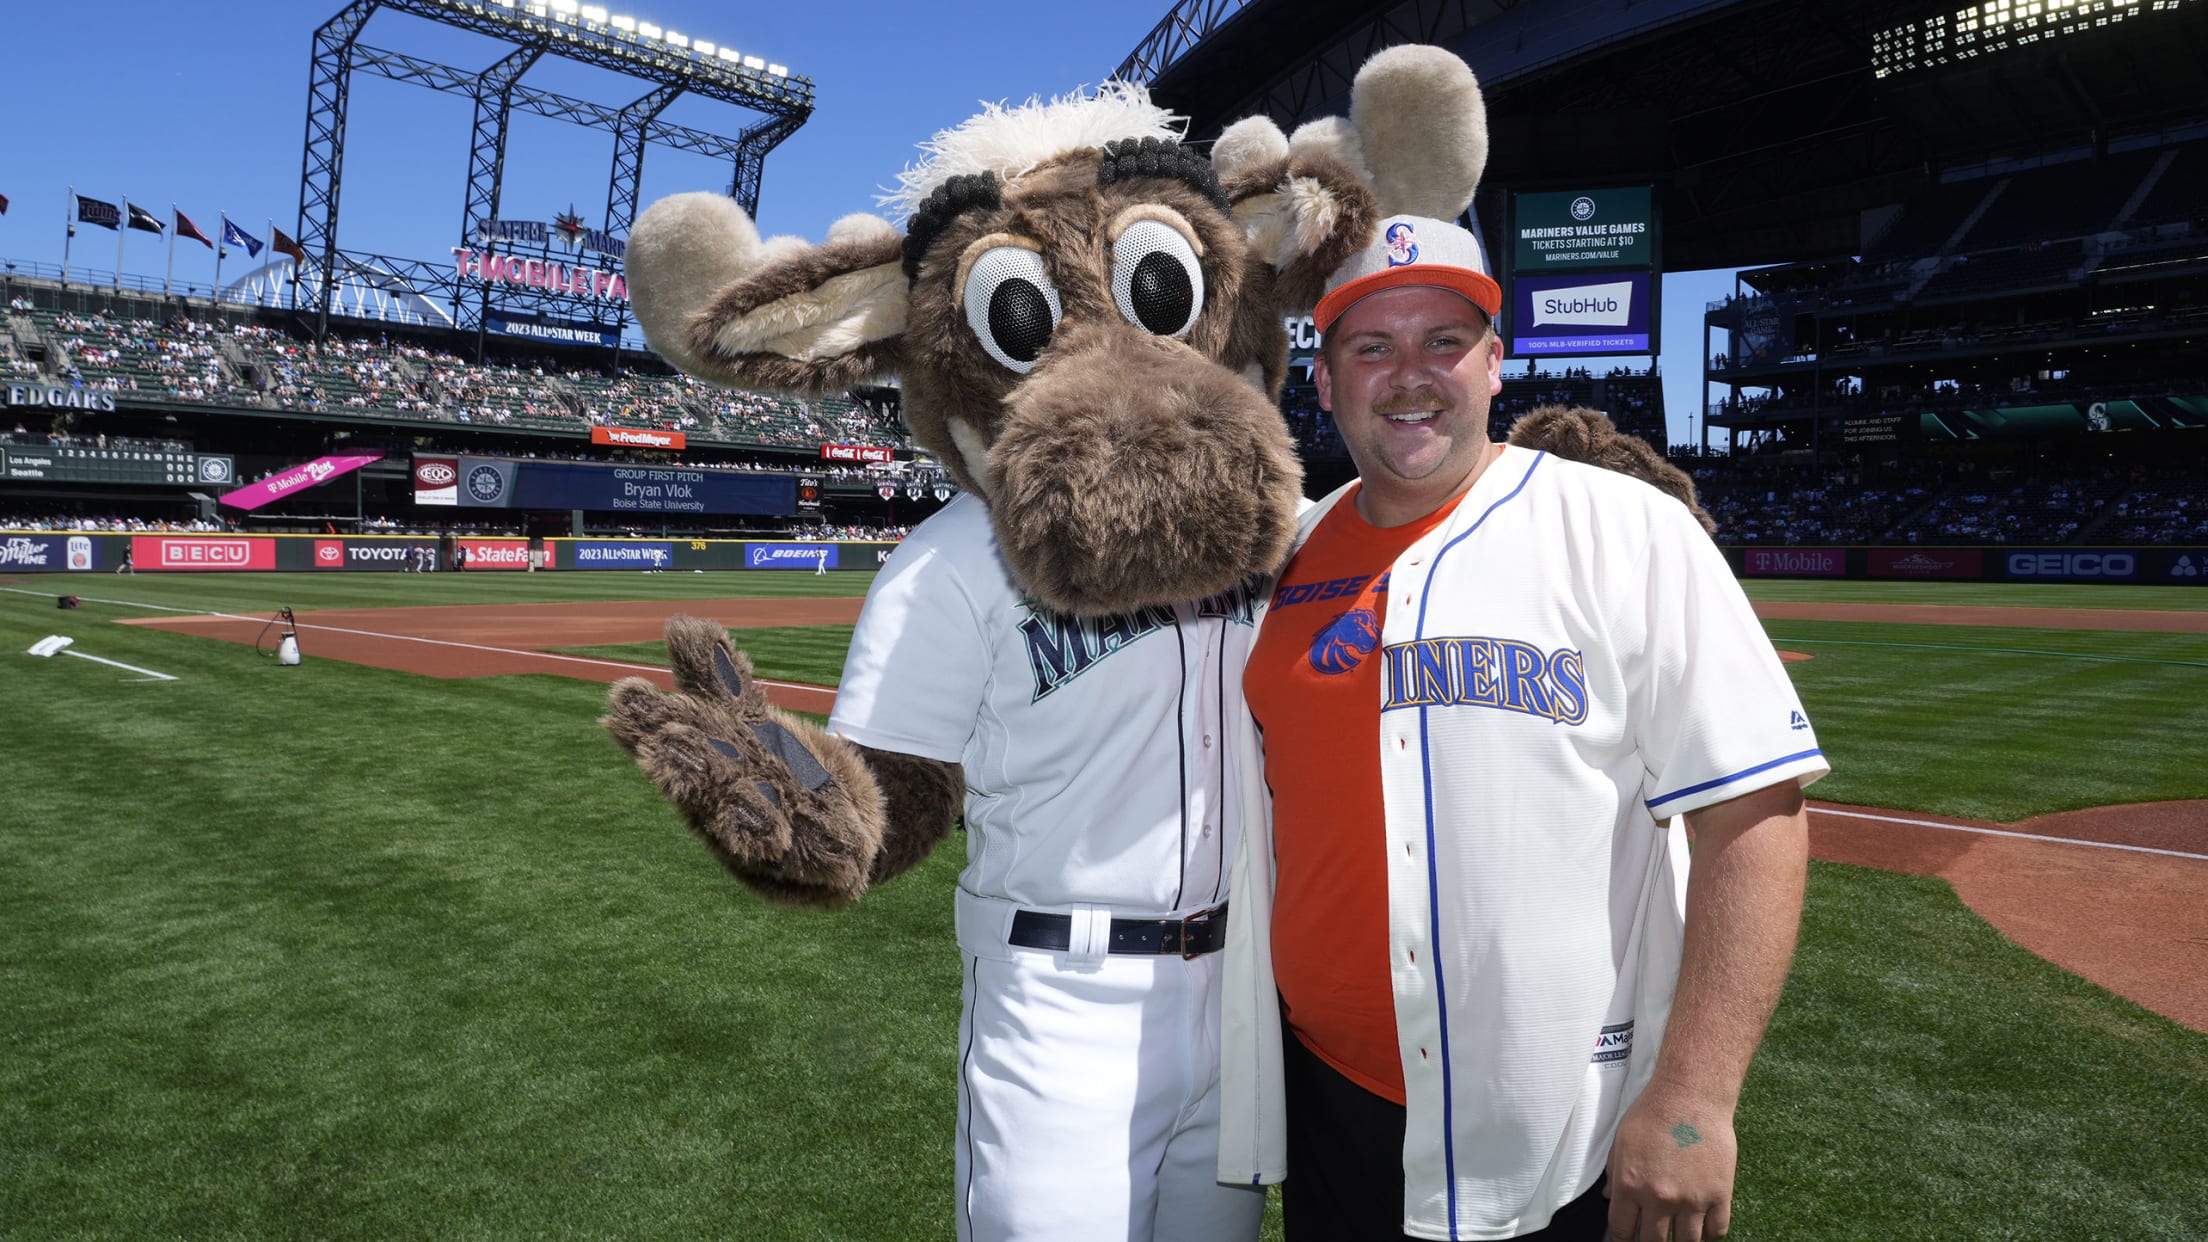 A Boise State alum at T-Mobile Park standing next to the Mariners mascot